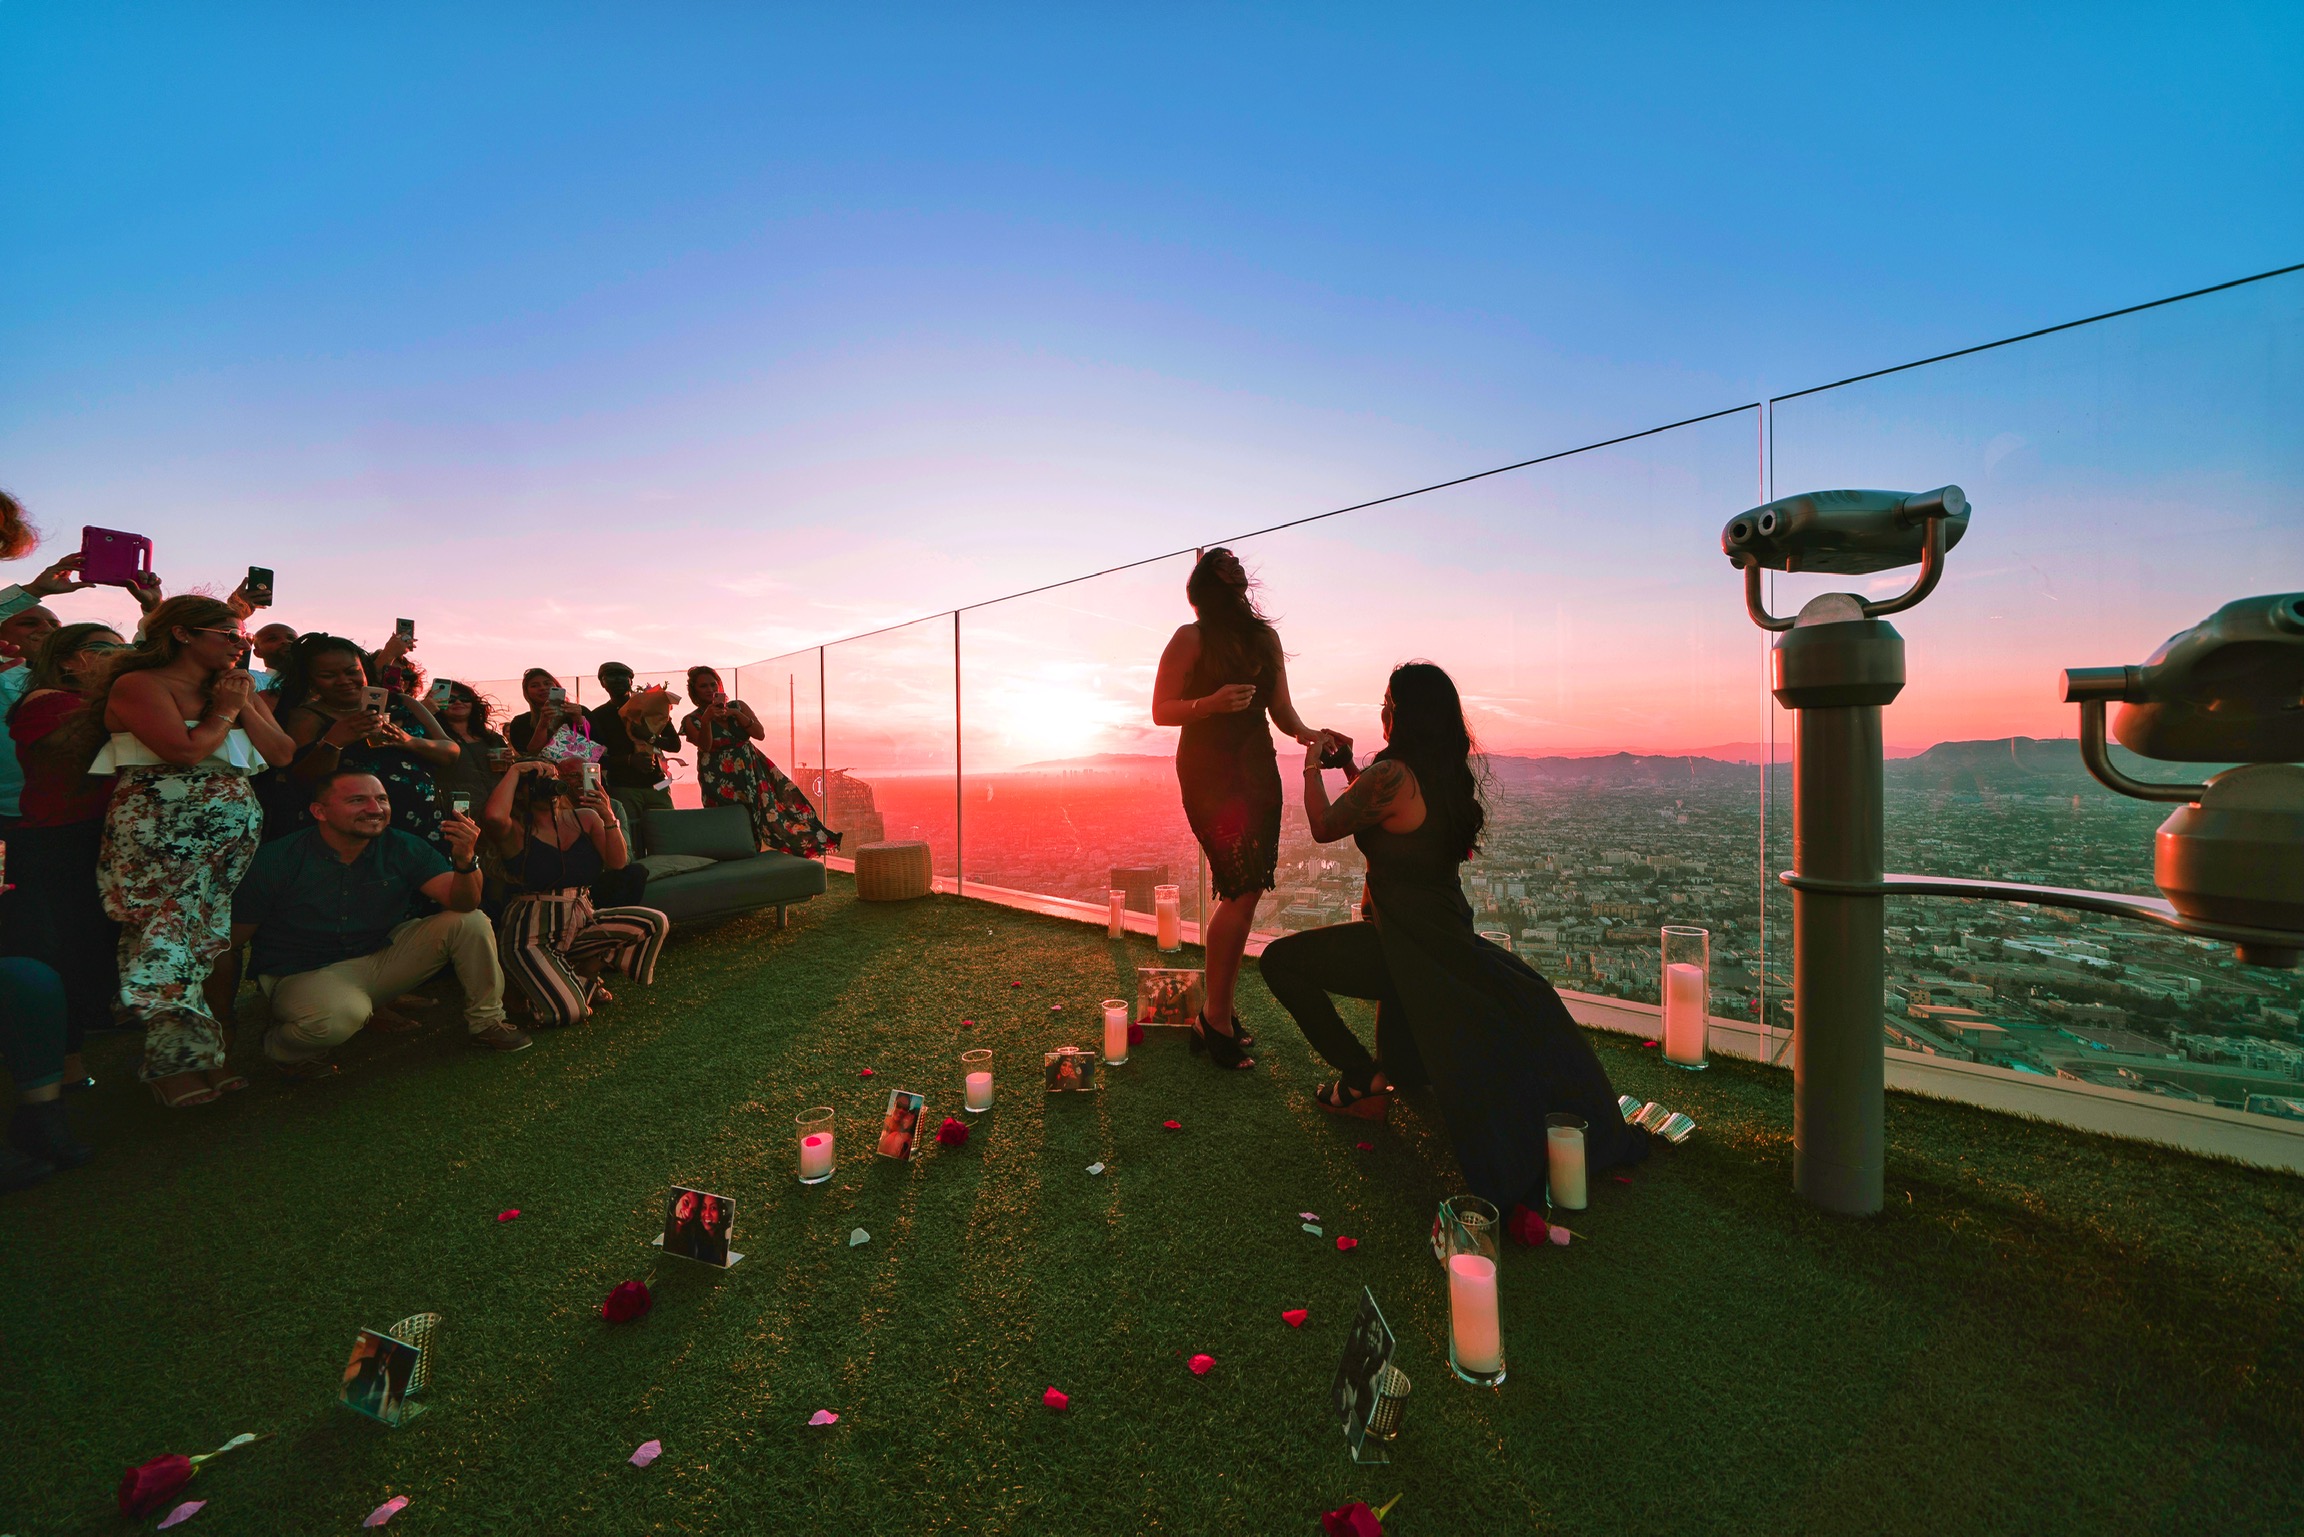 This romantic sunset proposal at OUE Skyspace has a beautiful backstory LGBTQ+ weddings engagements two brides skyline Los Angeles LA California